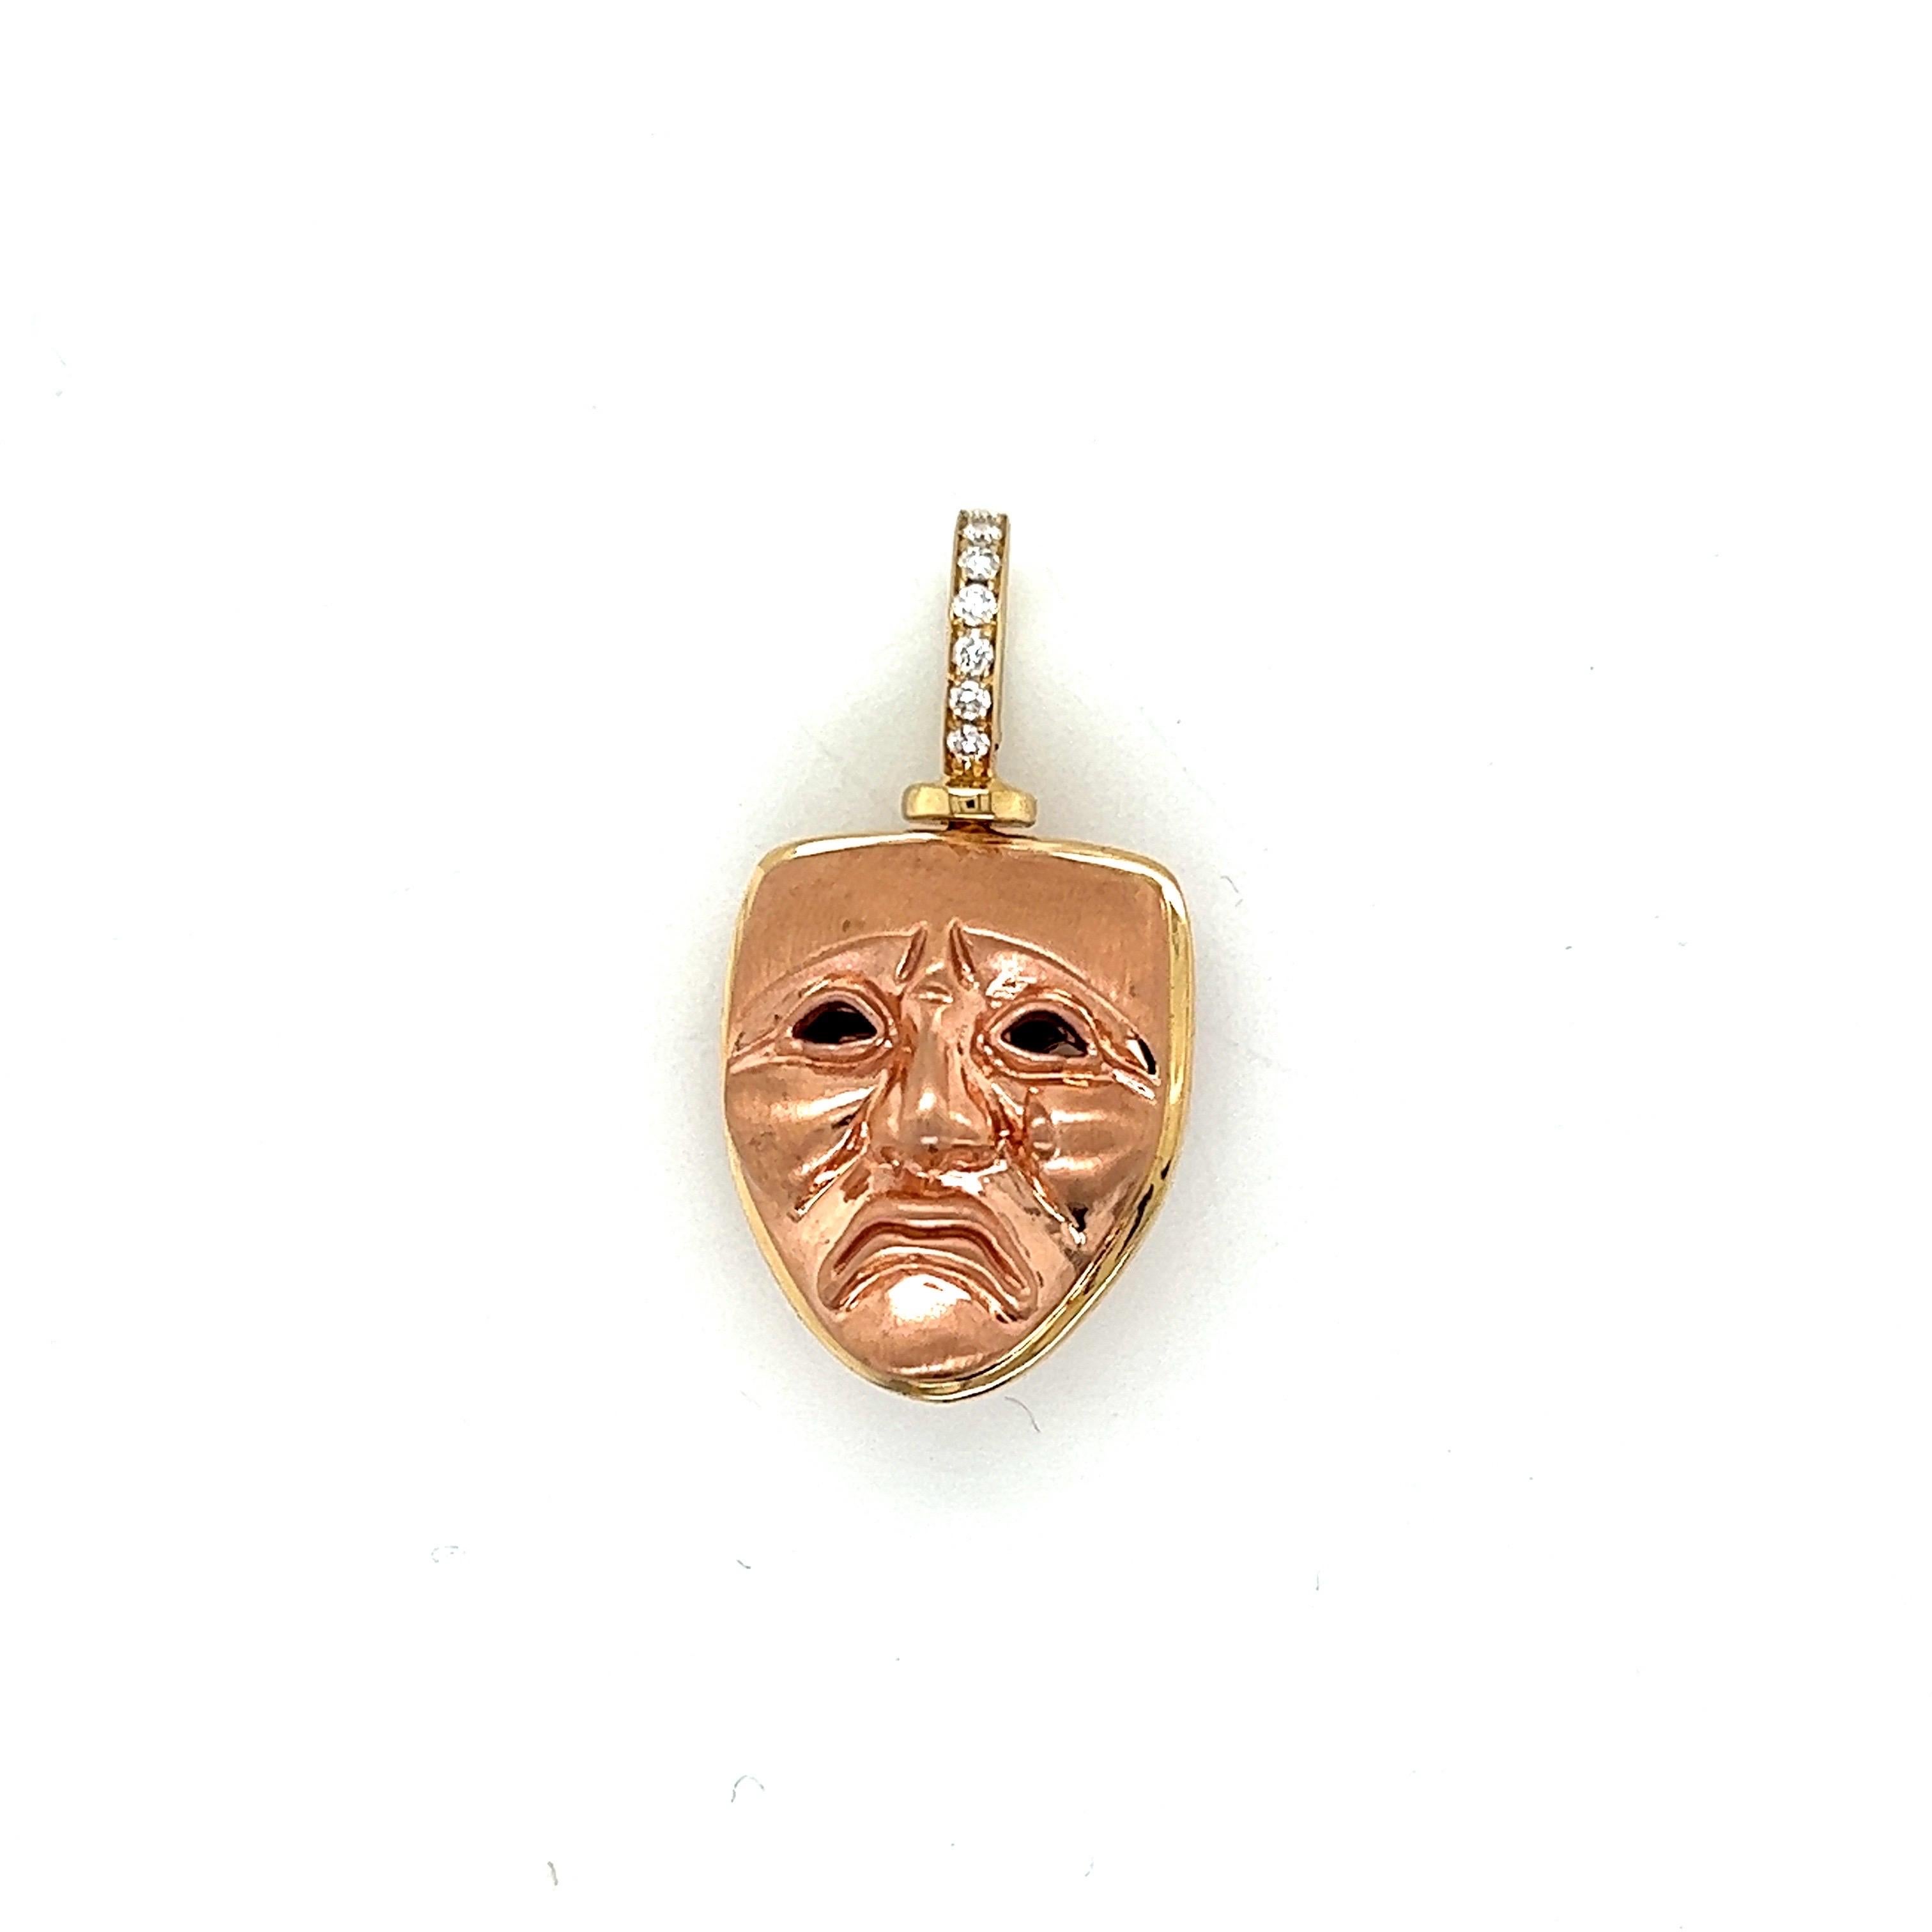 Drama/Tragedy/Comedy 14k rose and yellow gold pendant with swivel diamond bail. The faces are matte finish with highlights.
7 white diamonds in the bail.
The pin measurements (without bail): H: 19.25mm x W: 15.85mm x D: 11.90mm 
Total height with